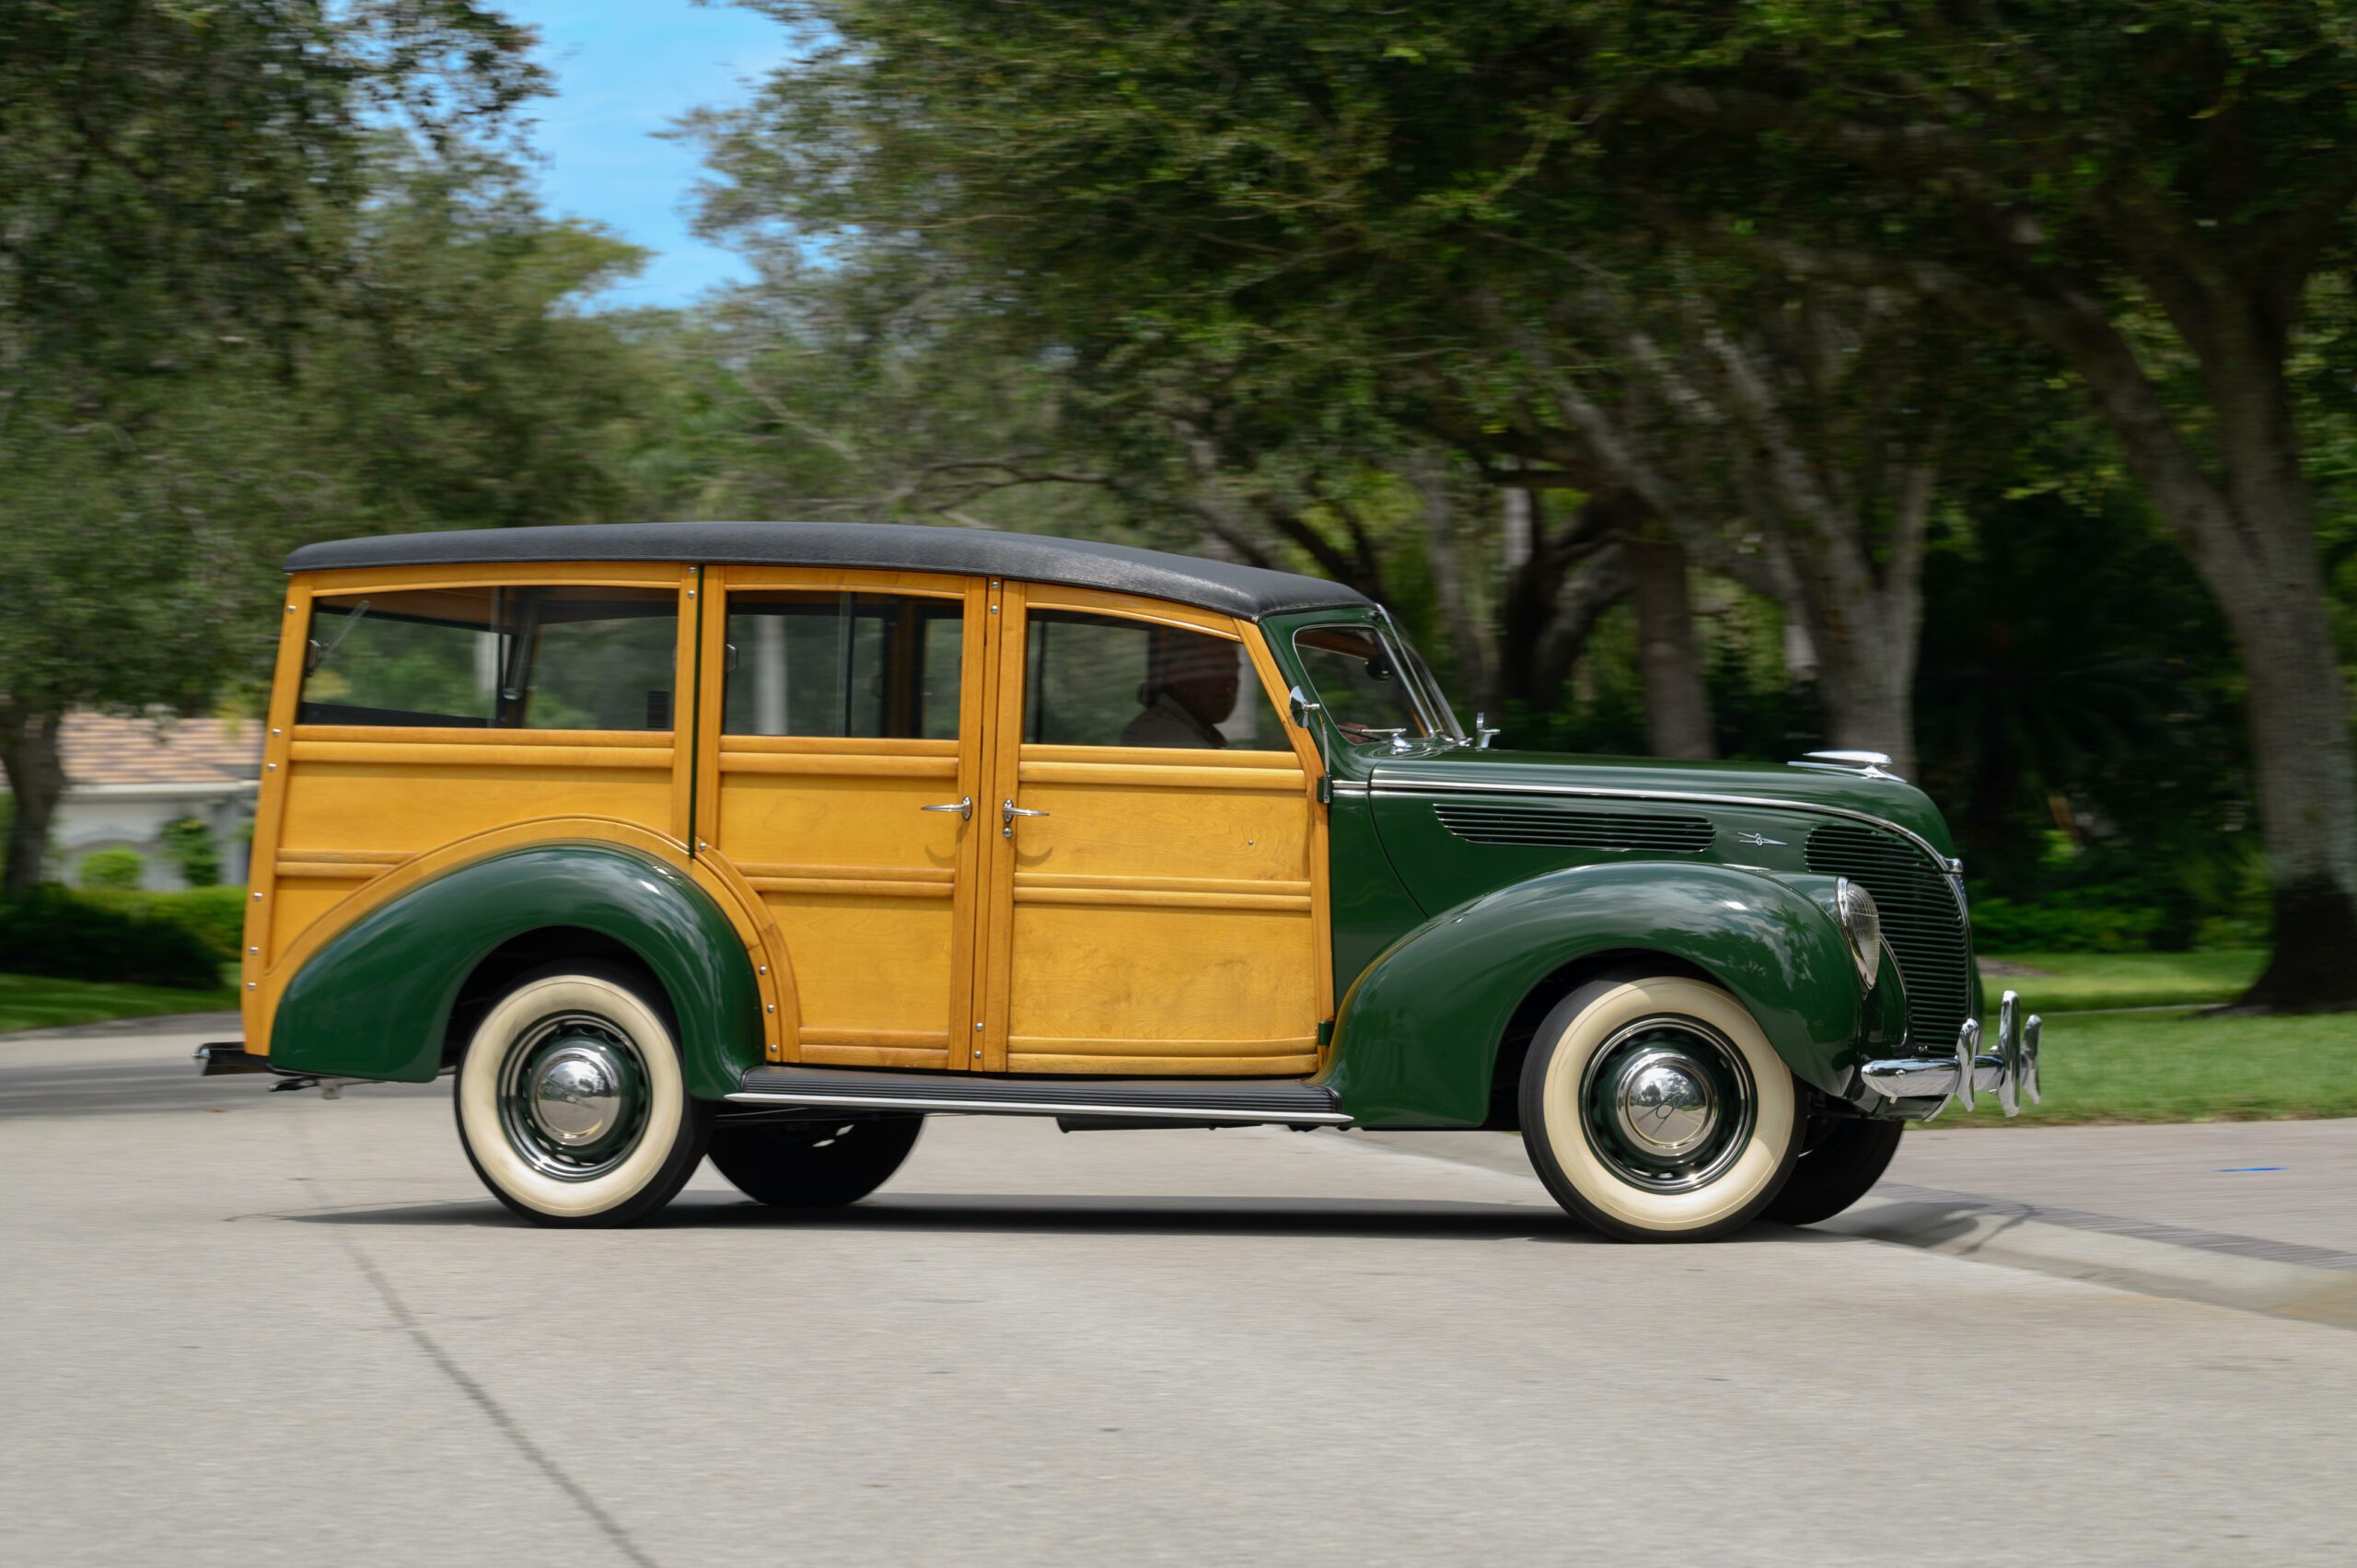 1938 Ford Model 81A Deluxe Station Wagon, ford, Ford Model 81A